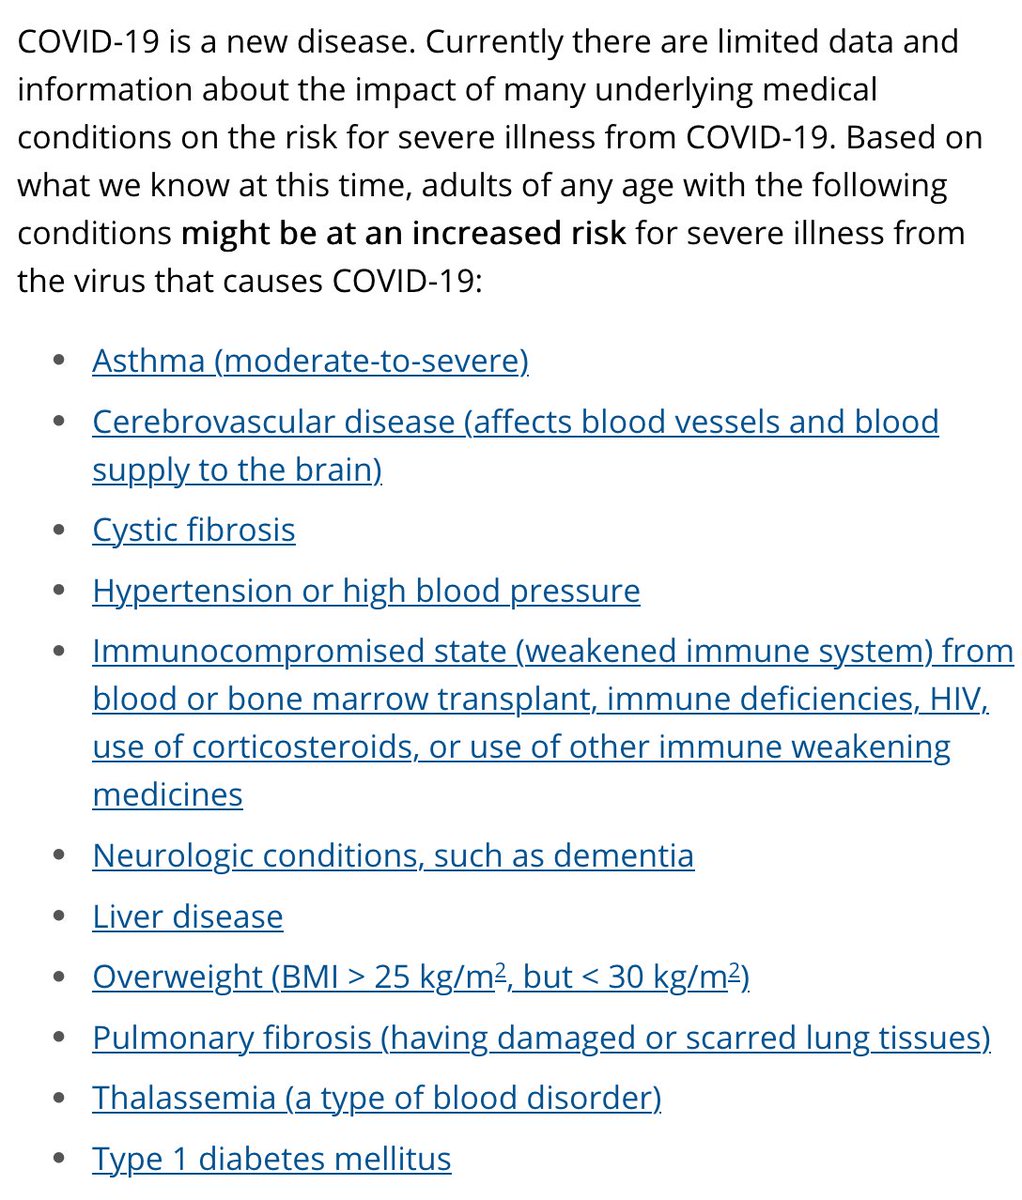 And then CDC says this "COVID-19 is a new disease. Currently there are limited data and information about the impact of many underlying medical conditions on the risk for severe illness from COVID-19. "Here are 11 conditions that CDC says "might" cause increased risk /10